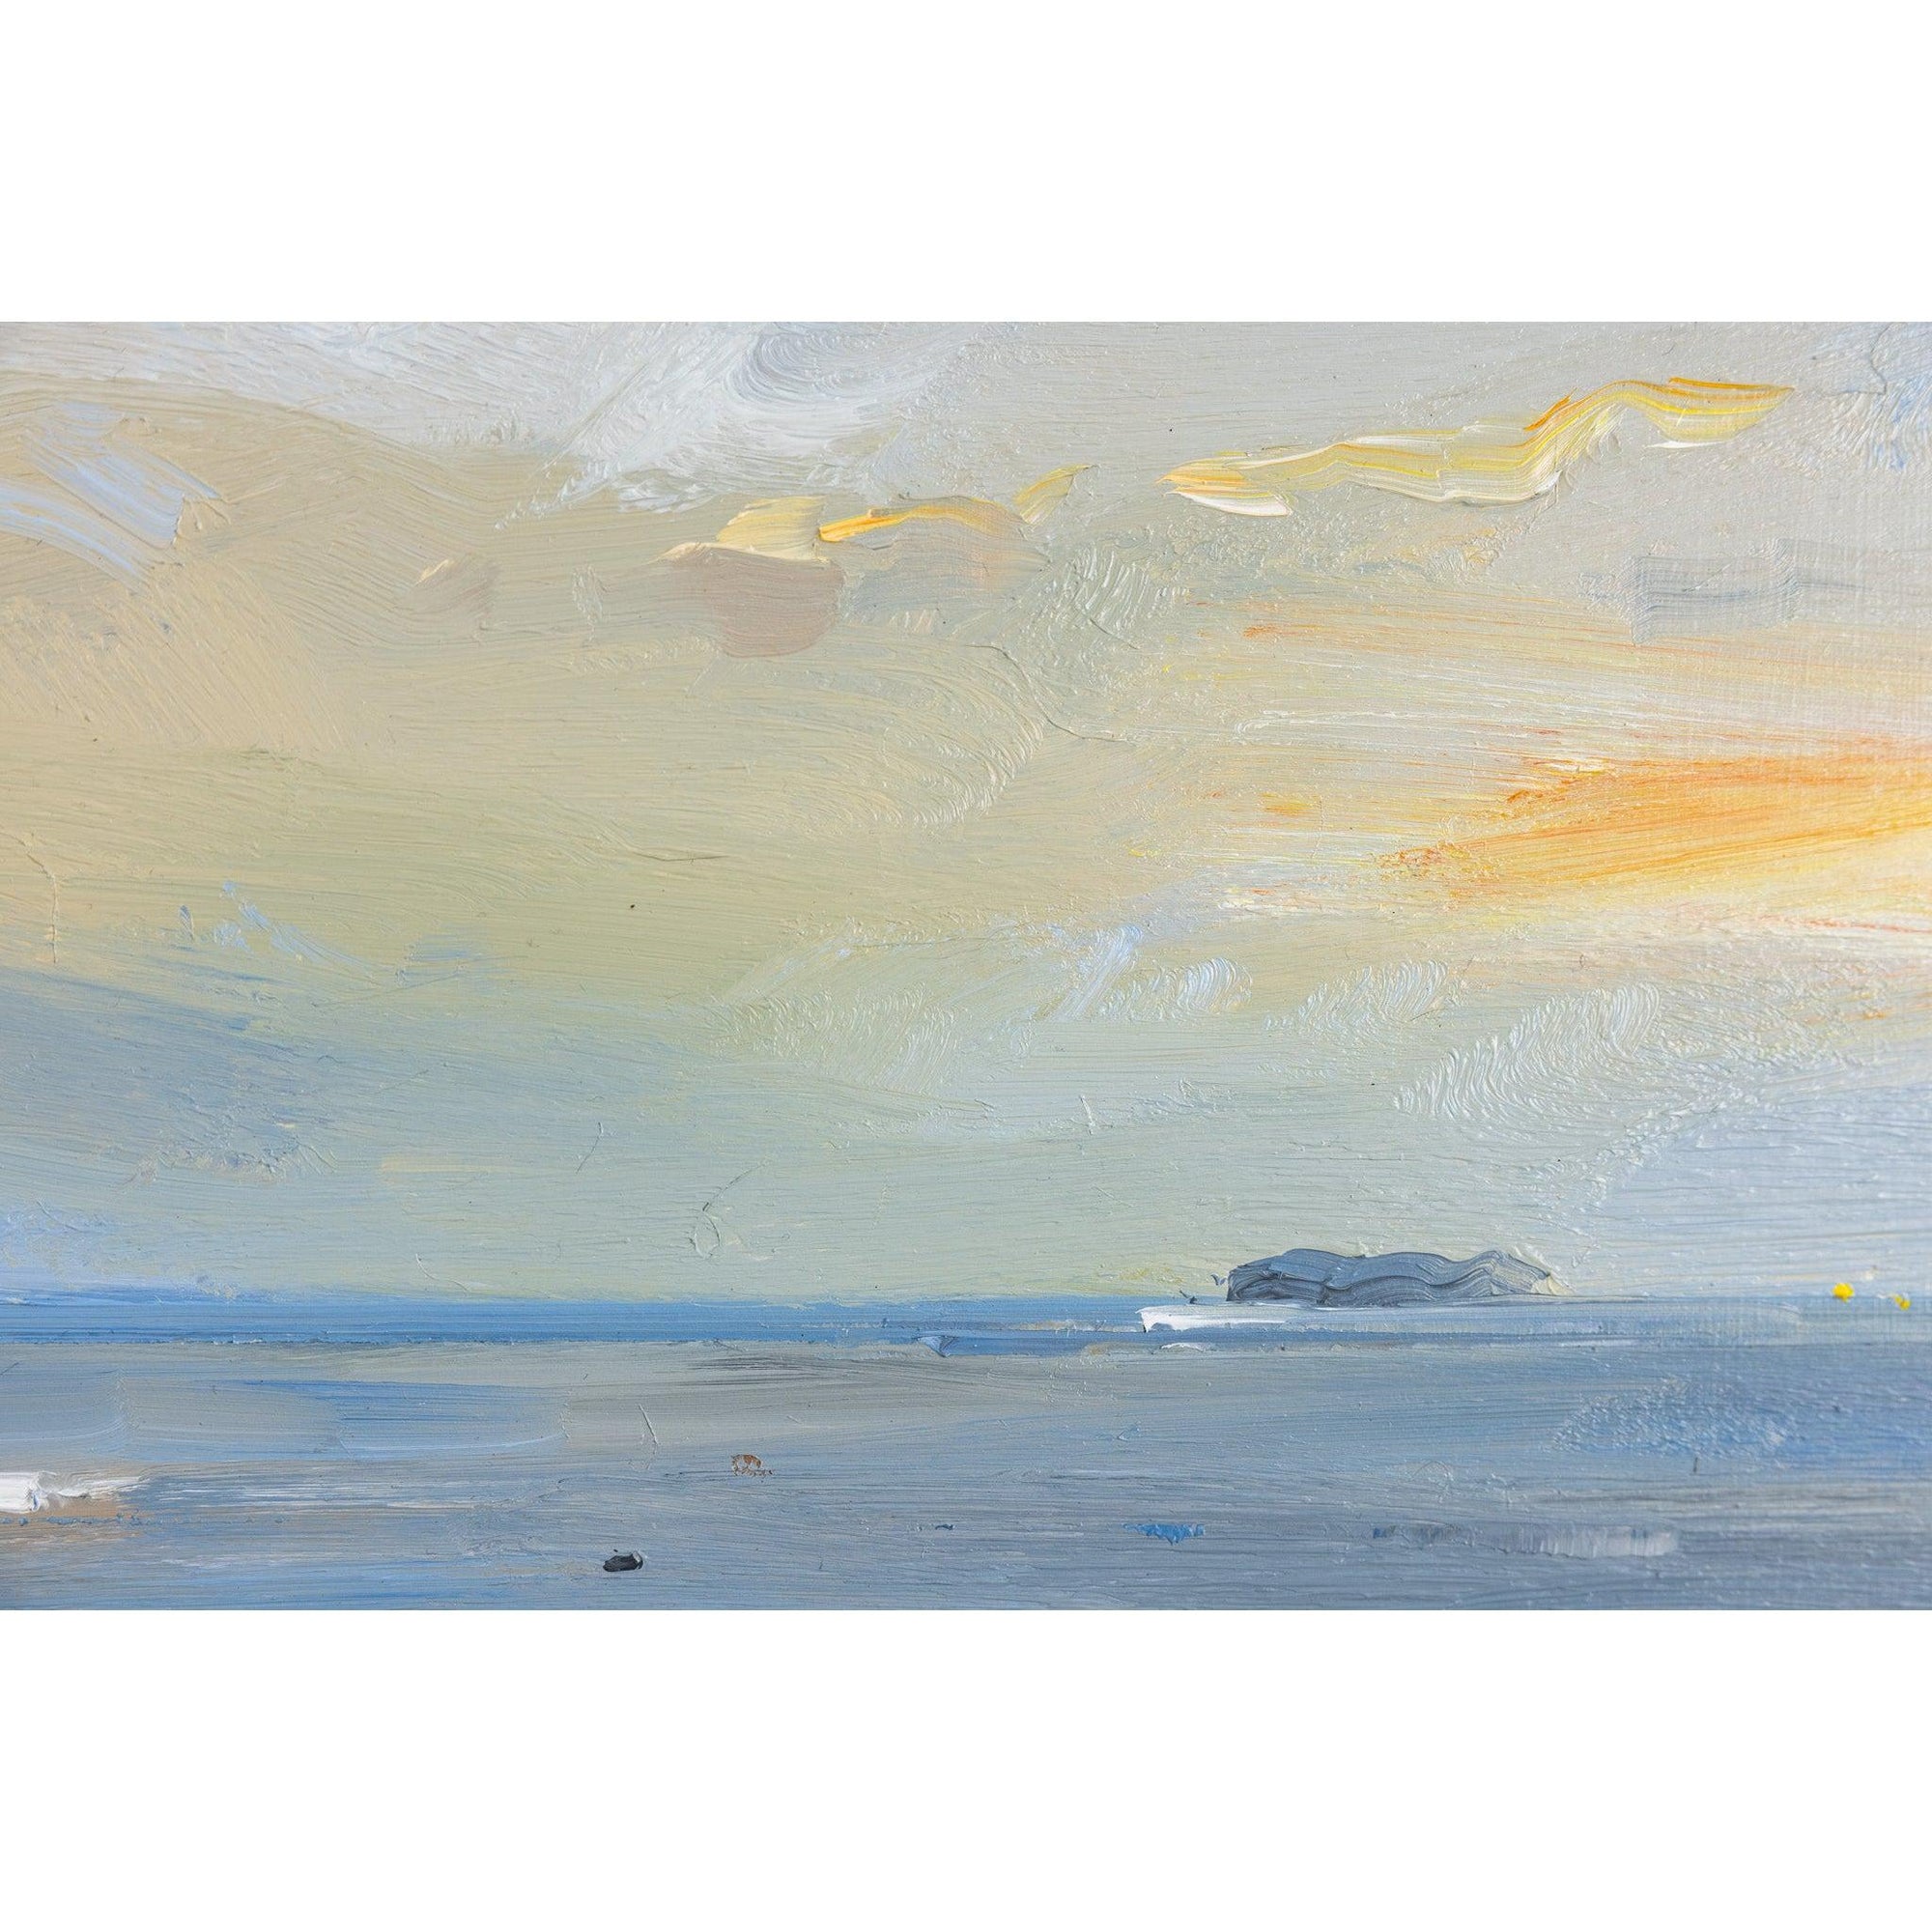 'Sunset, Mother Ivey's Bay' oil on board original by David Atkins, available at Padstow Gallery, Cornwall